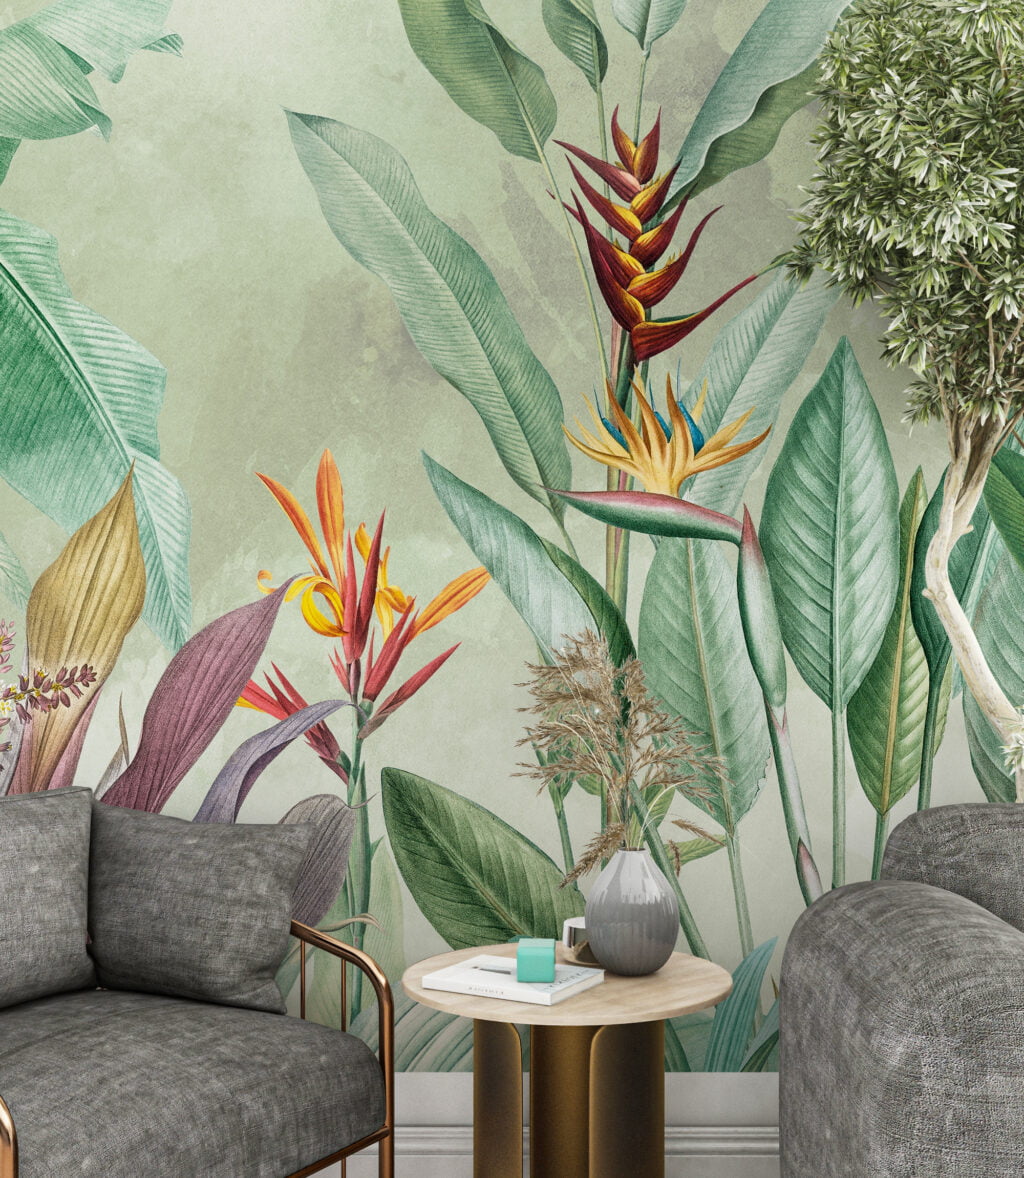 Large Vintage Colorful Botanical Plants Wallpaper, Artful Tropical Leaves And Plants Peel & Stick Wall Mural